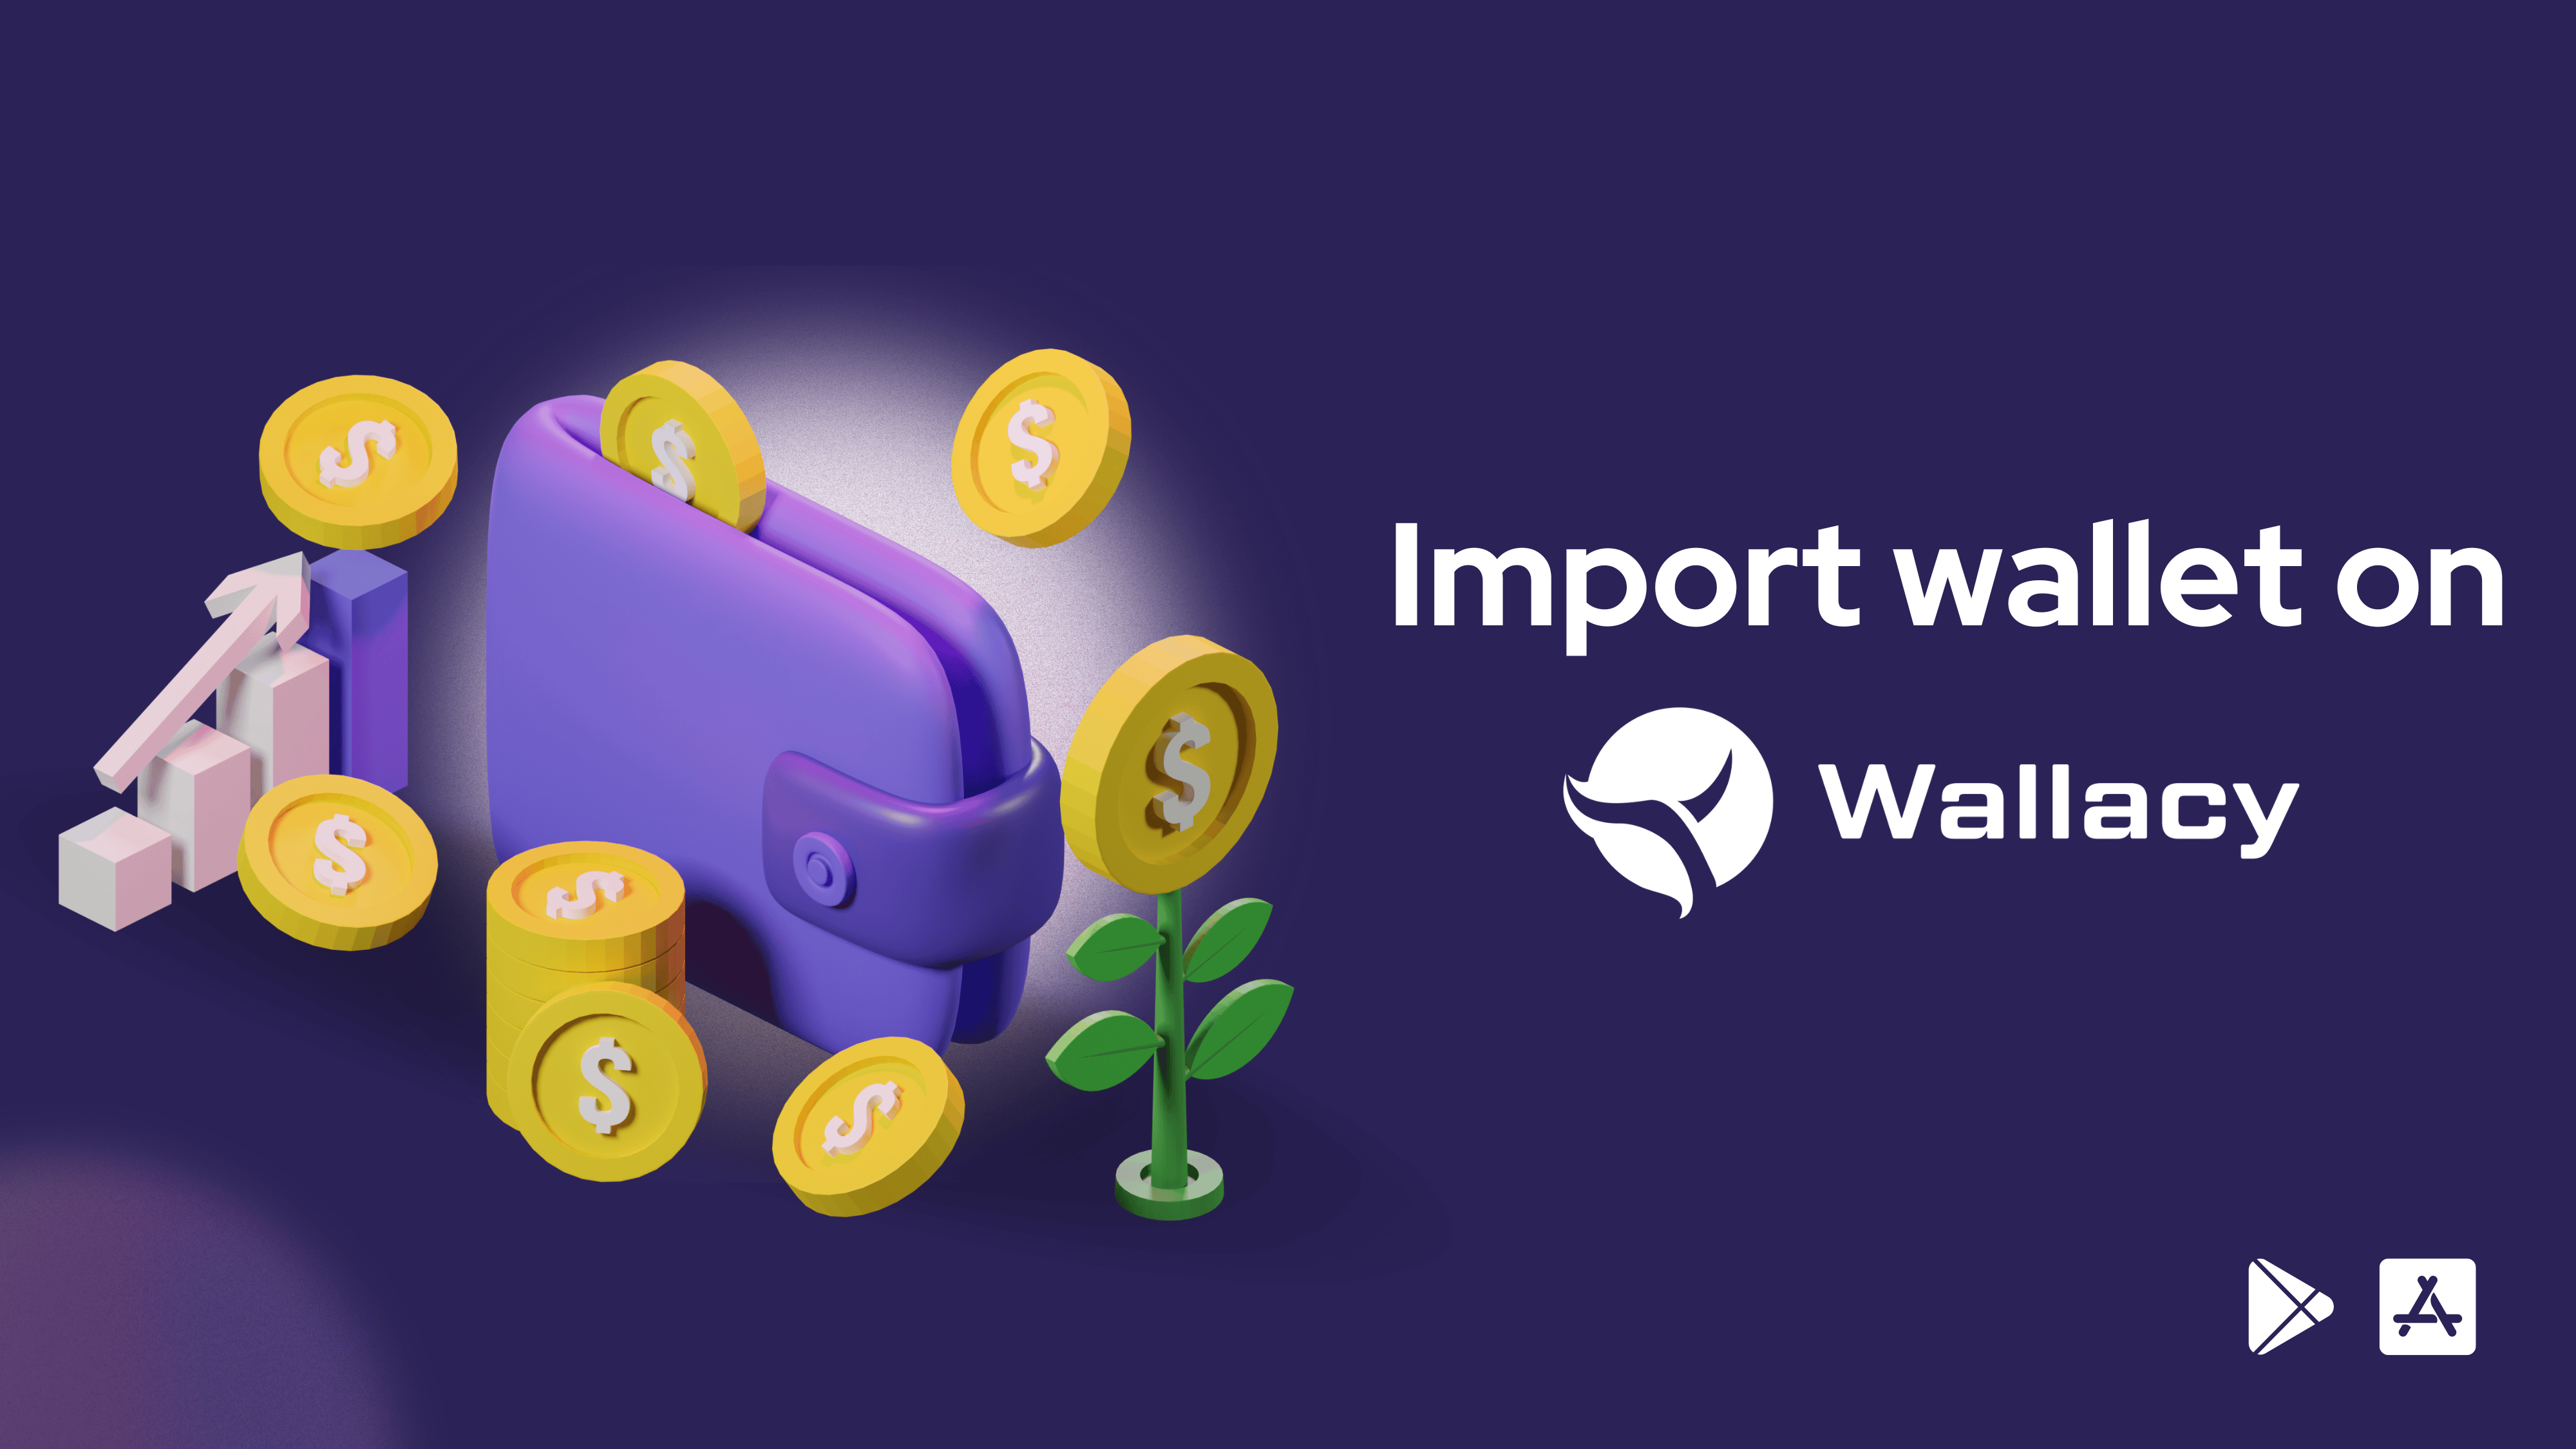 How to import or recover an existing wallet on Wallacy?